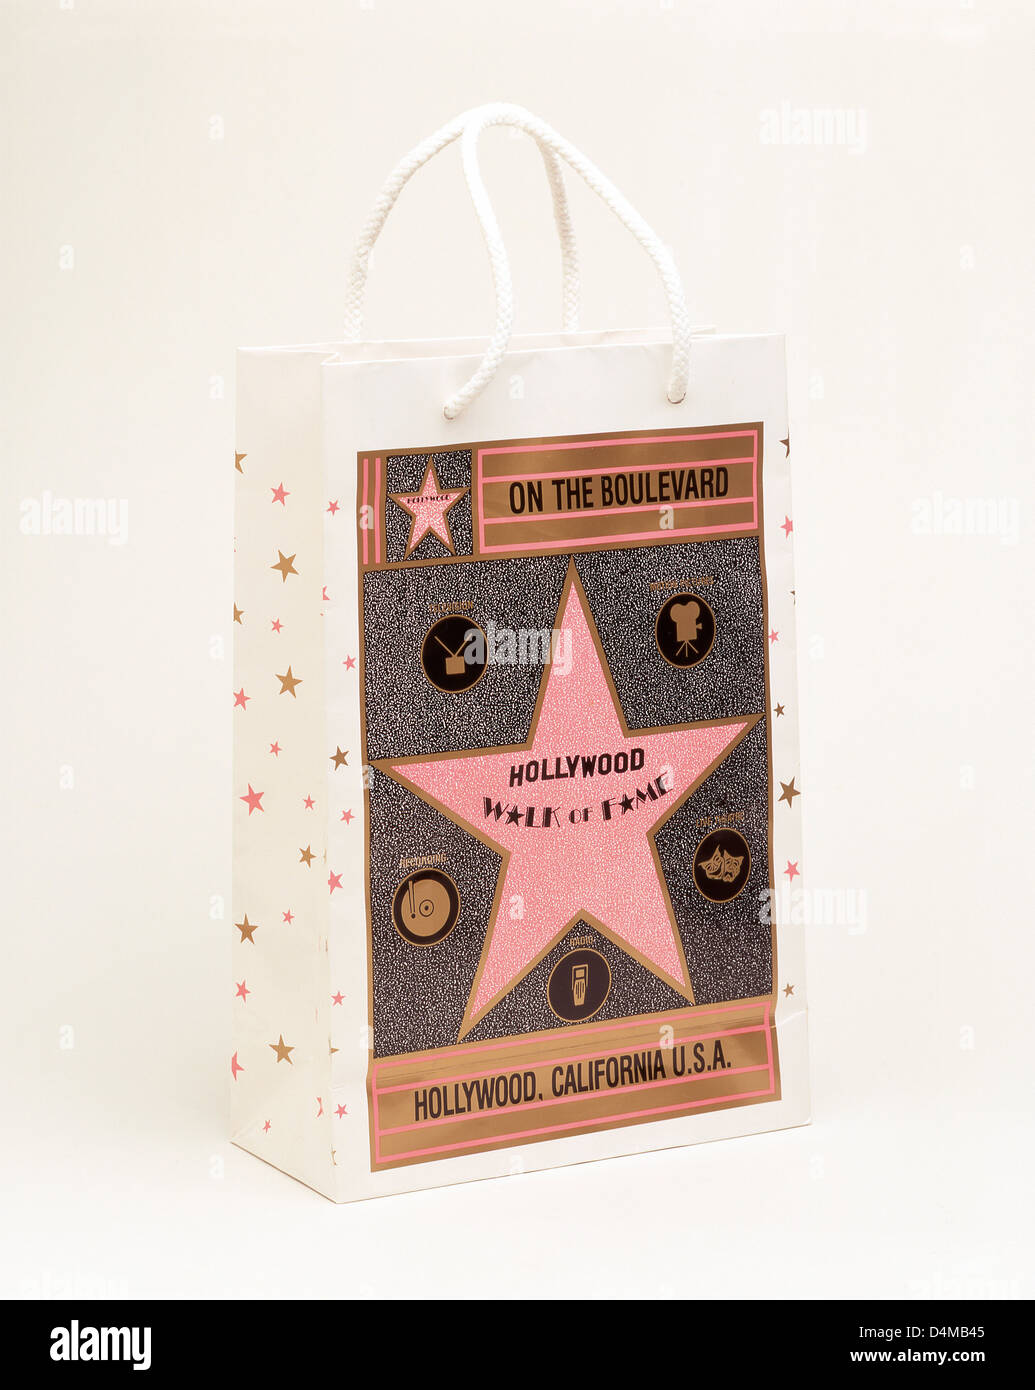 Souvenir Hollywood 'Walk of Fame' shopping bag, Hollywood, Los Angeles, California, United States of America Stock Photo